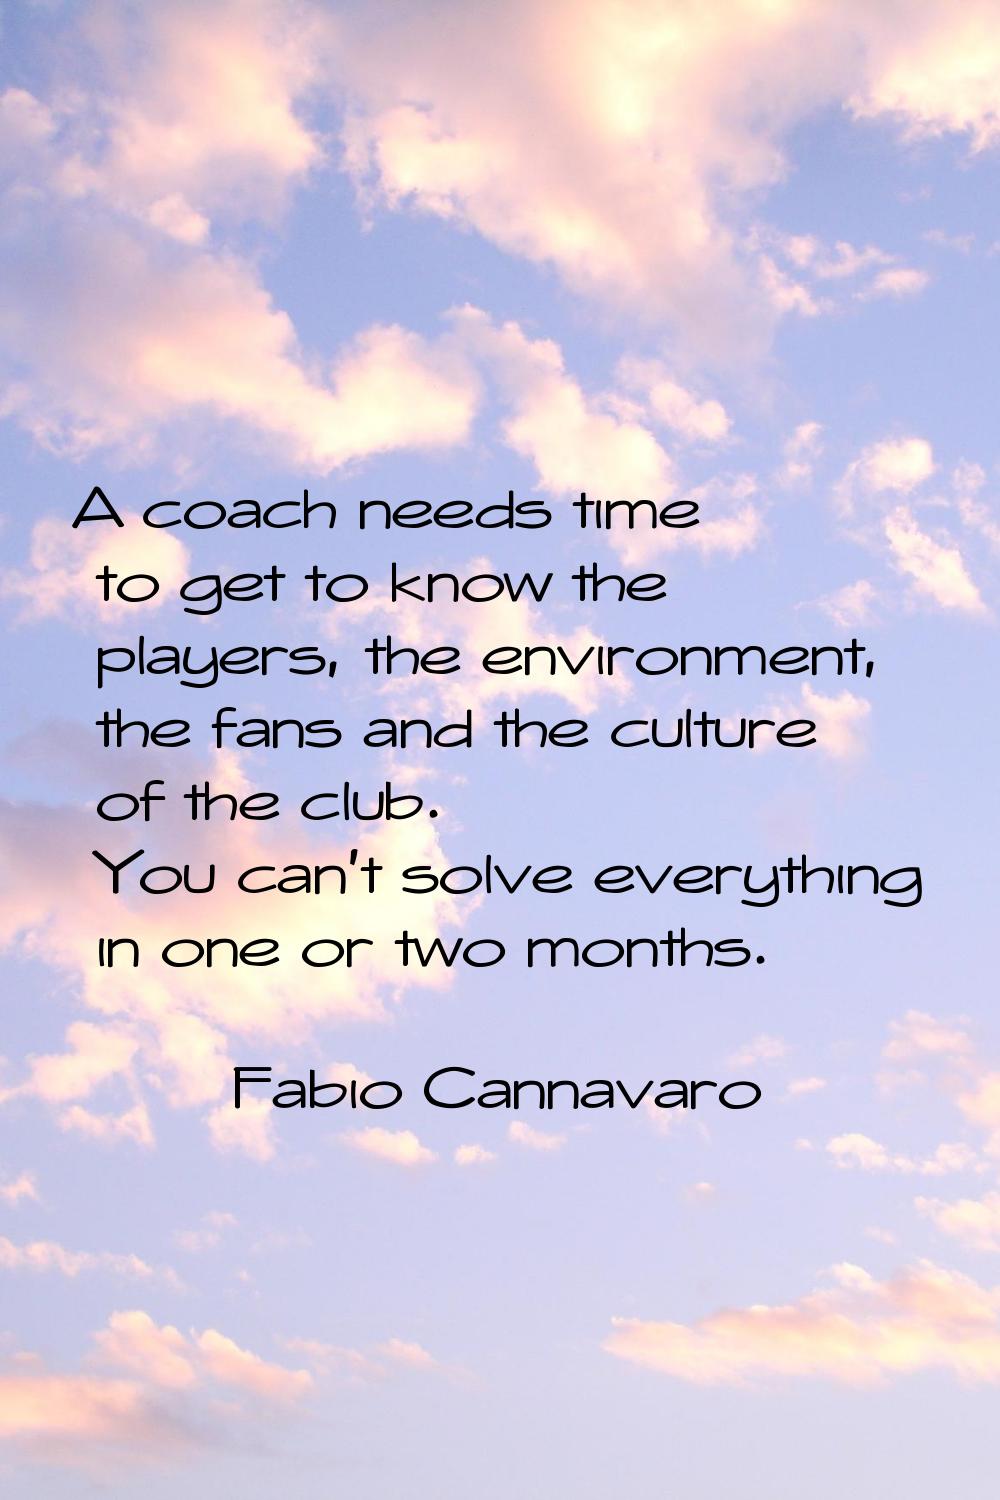 A coach needs time to get to know the players, the environment, the fans and the culture of the clu